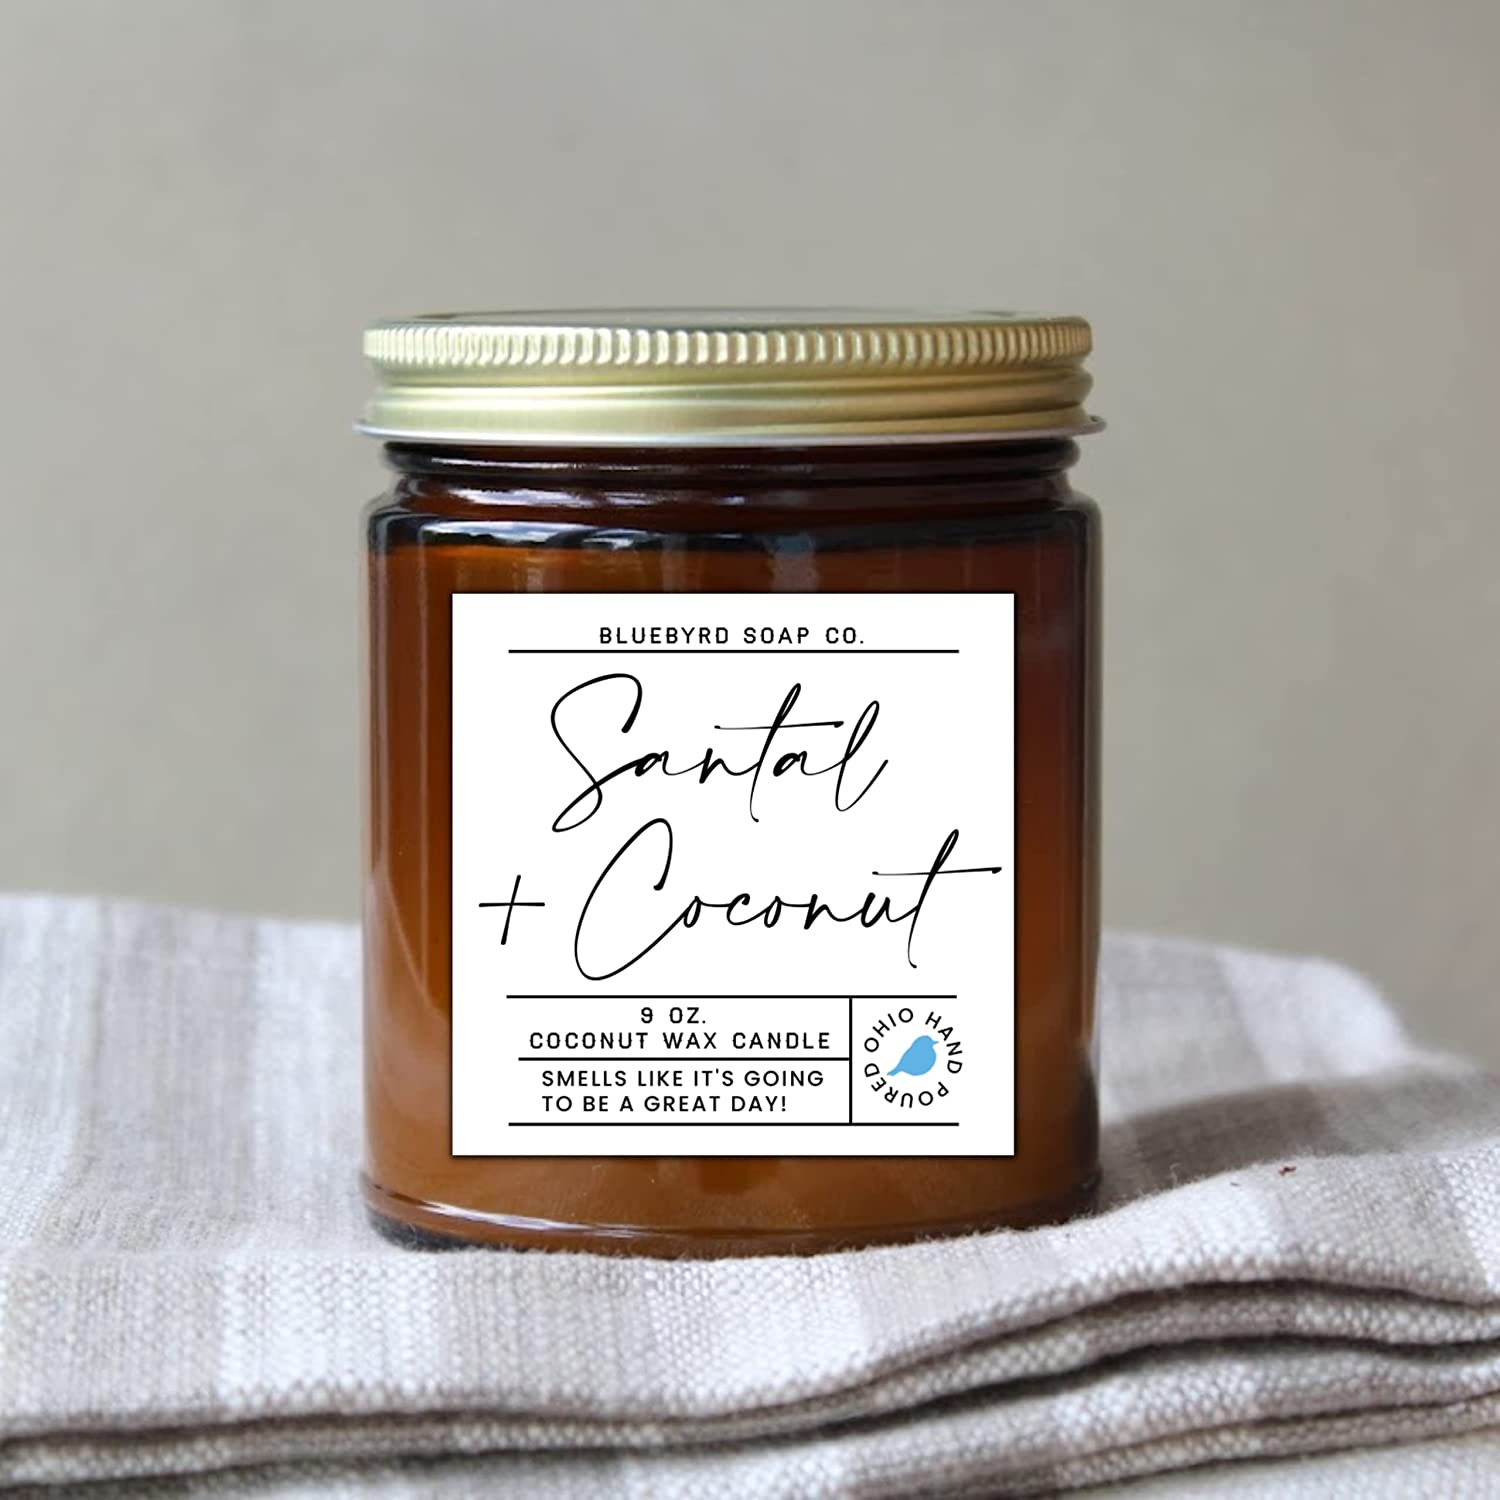 Santal + Coconut Soy Wax Blend Scented Candle | Beach Candle | Summer  Candle | Non-toxic | Handmade